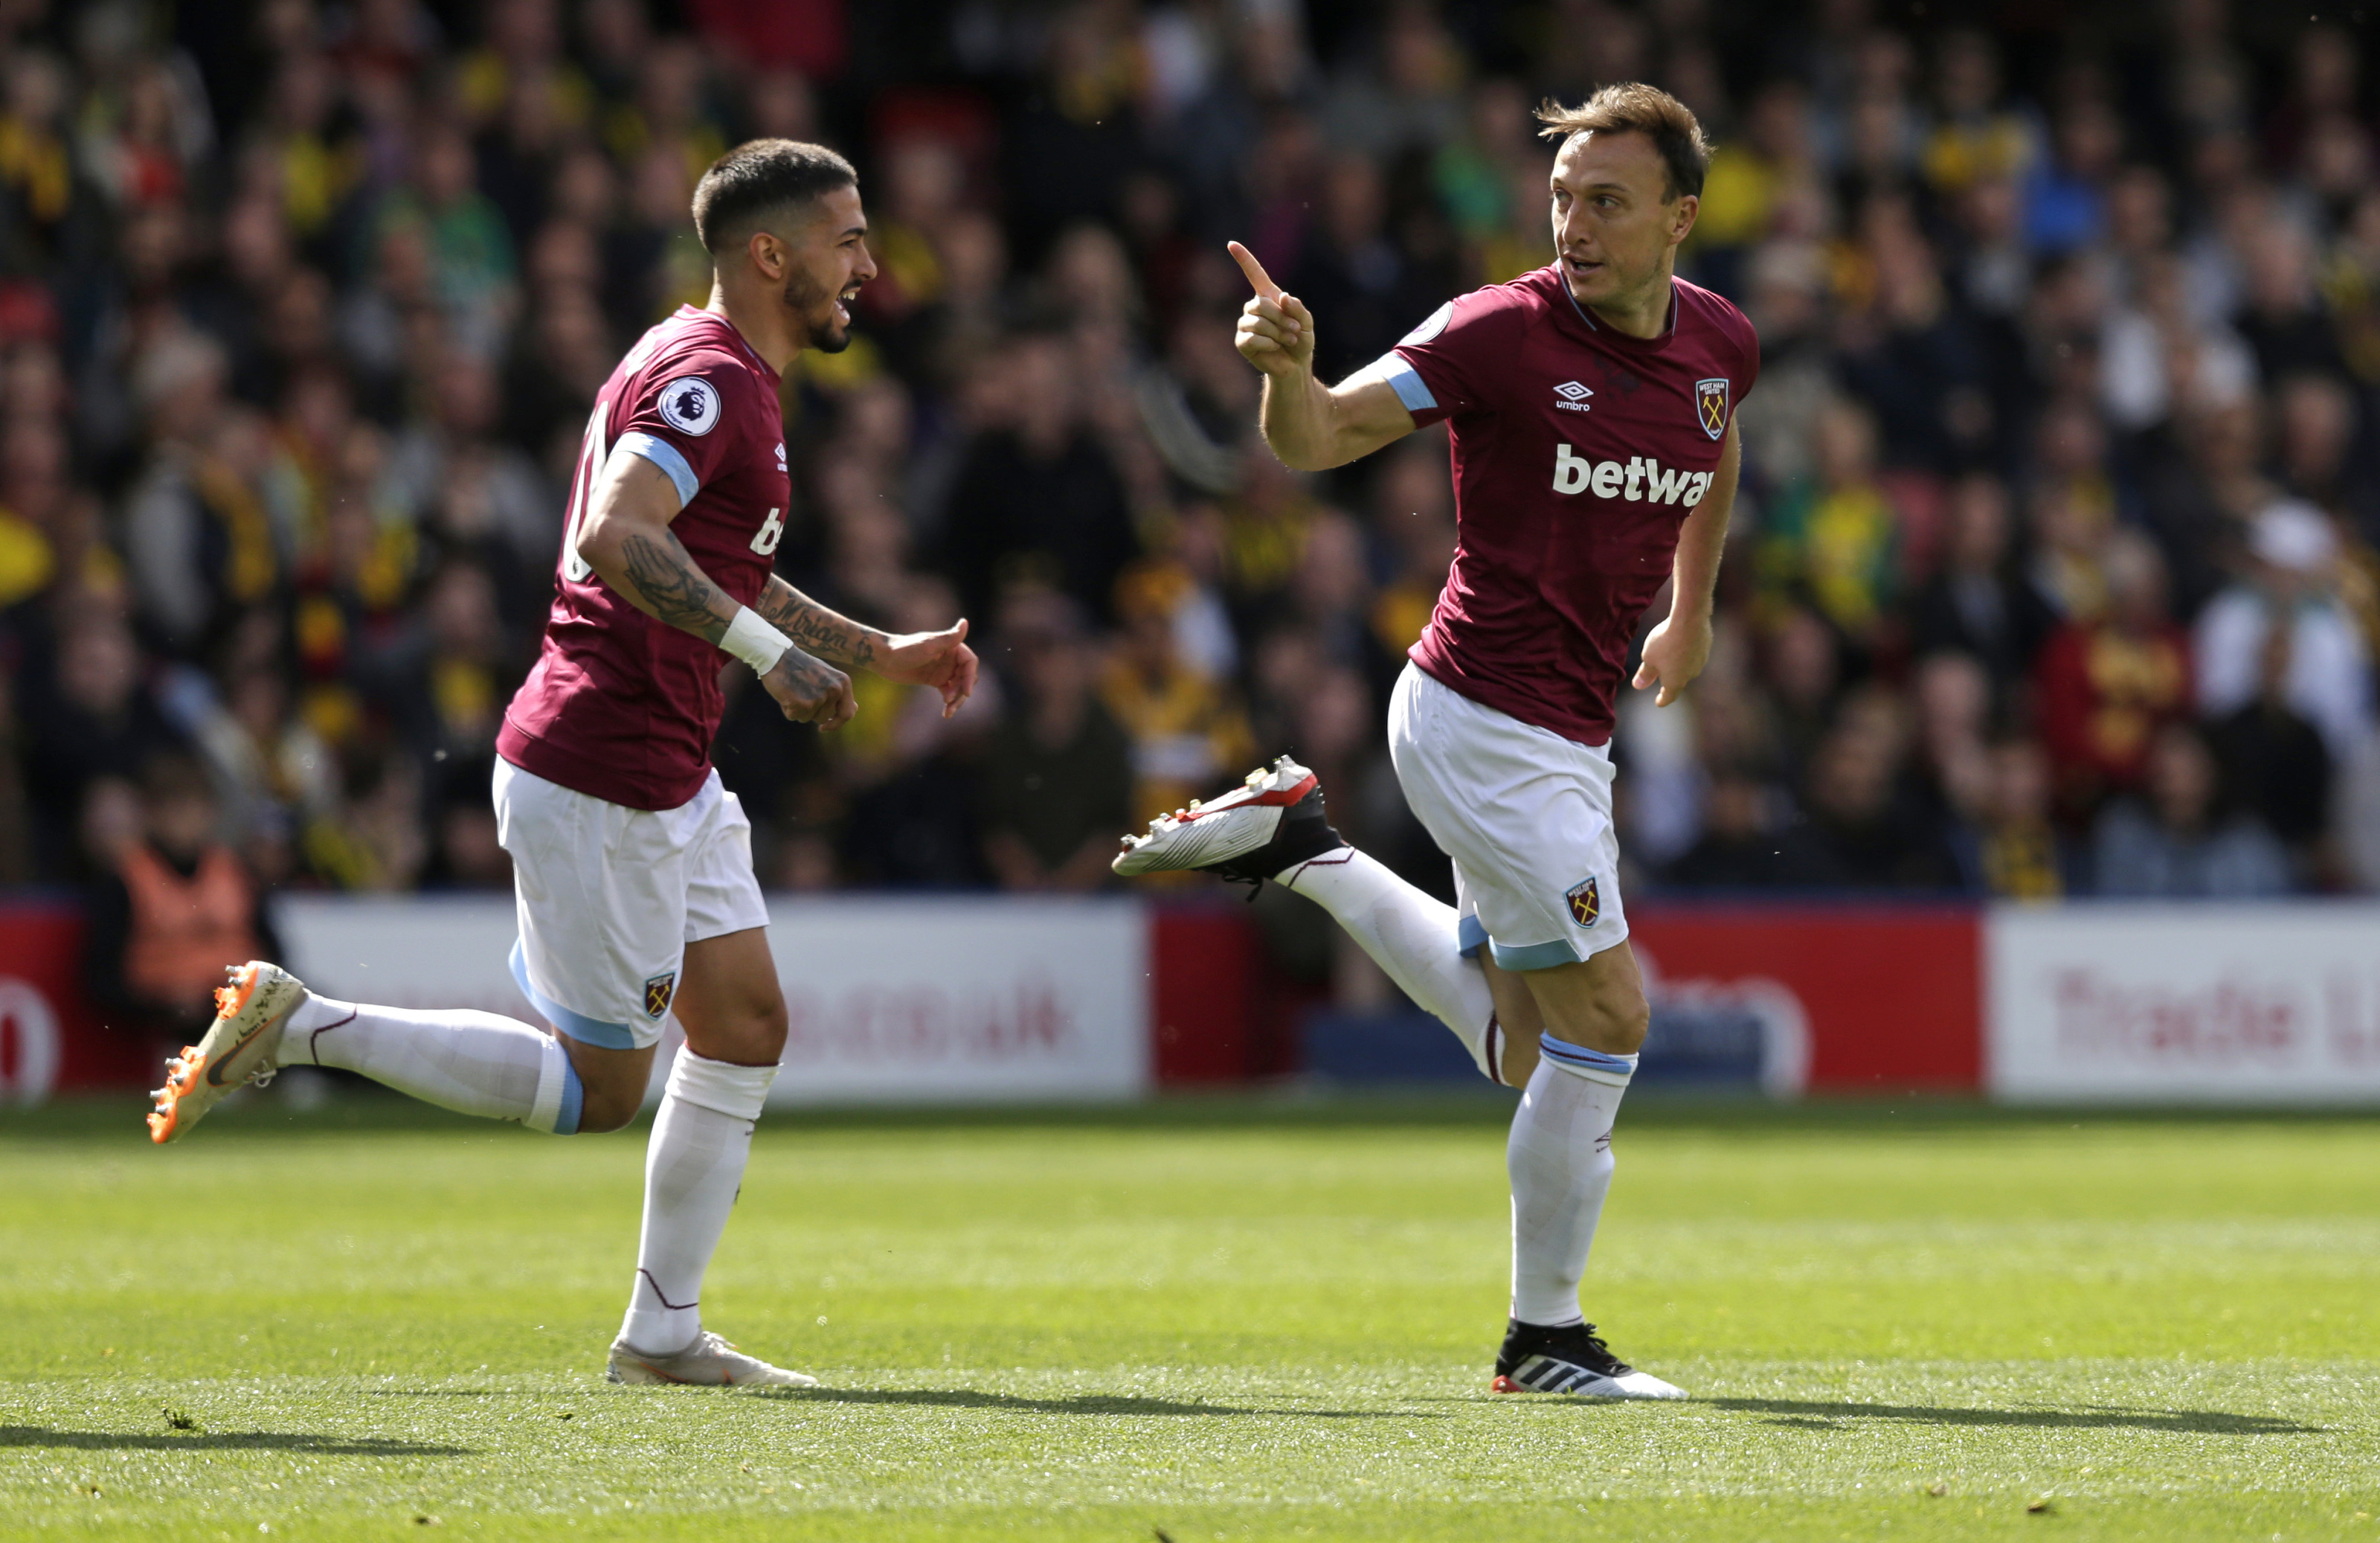 West Ham should look to the past against Watford to get there first win